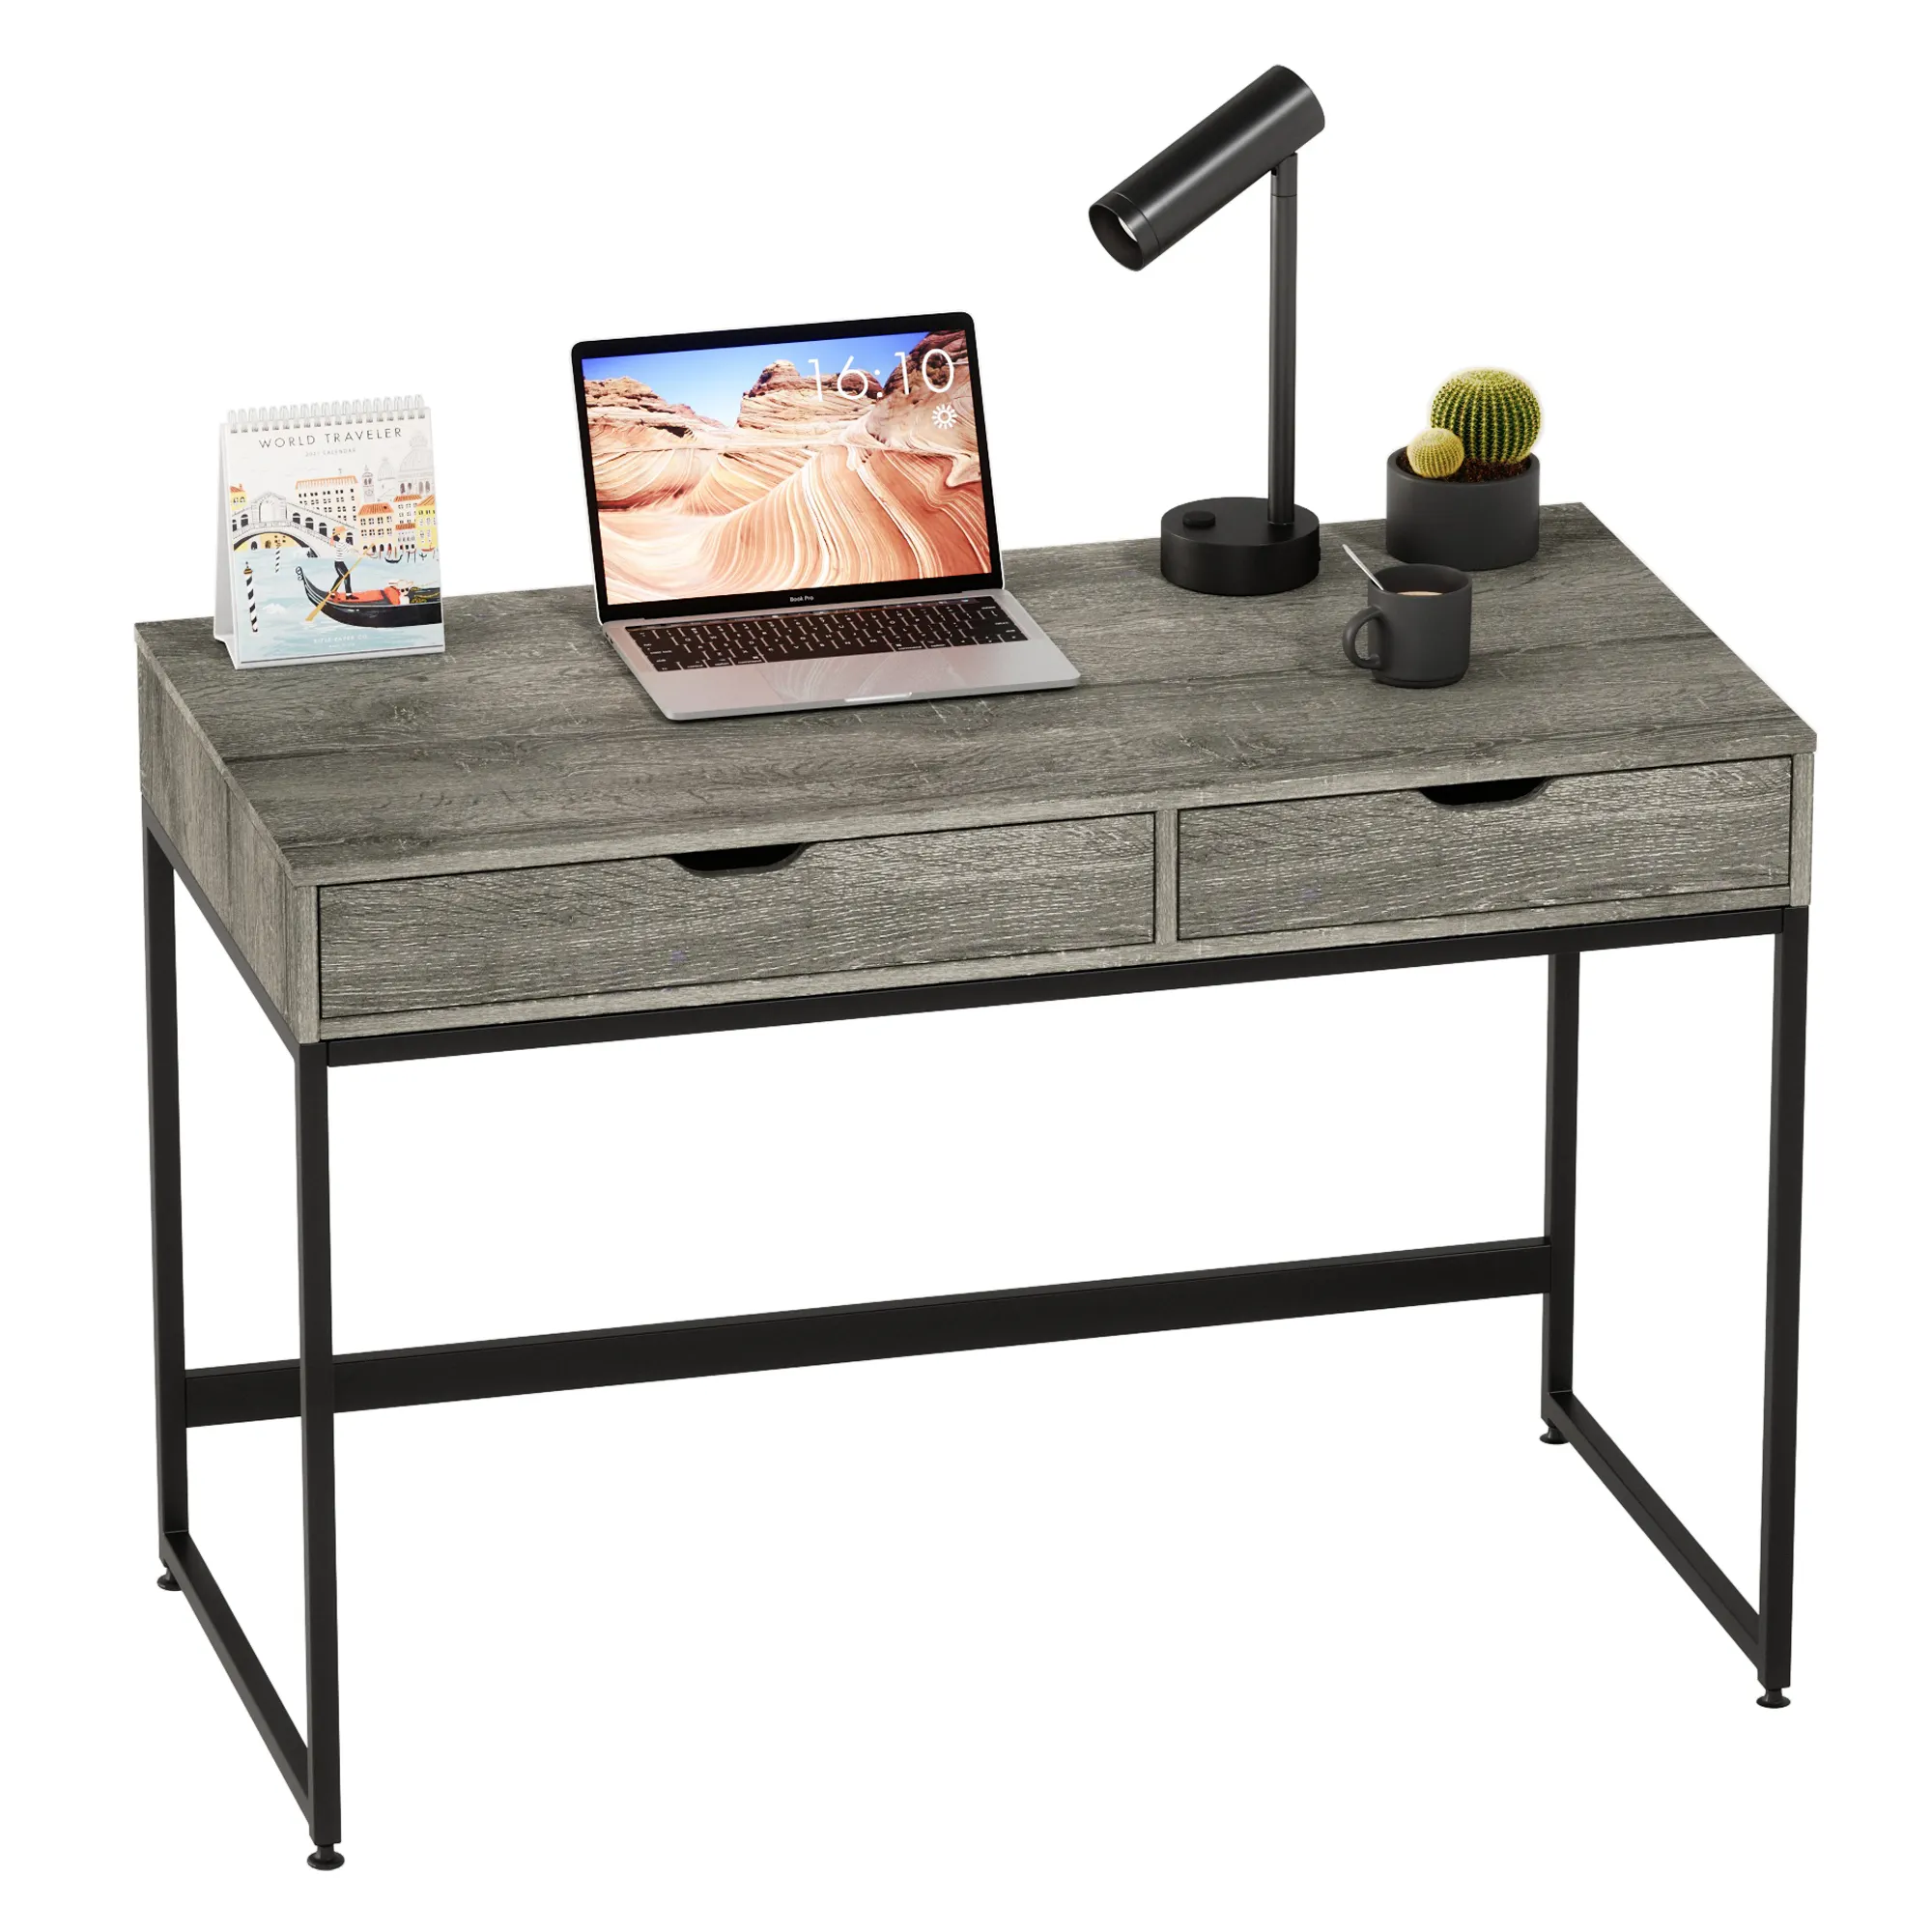 BESTIER OEM Customize Wholesale Price Space Saving White Steel Frame MDF Wood Home Office Desk Table With Drawer For Work Study